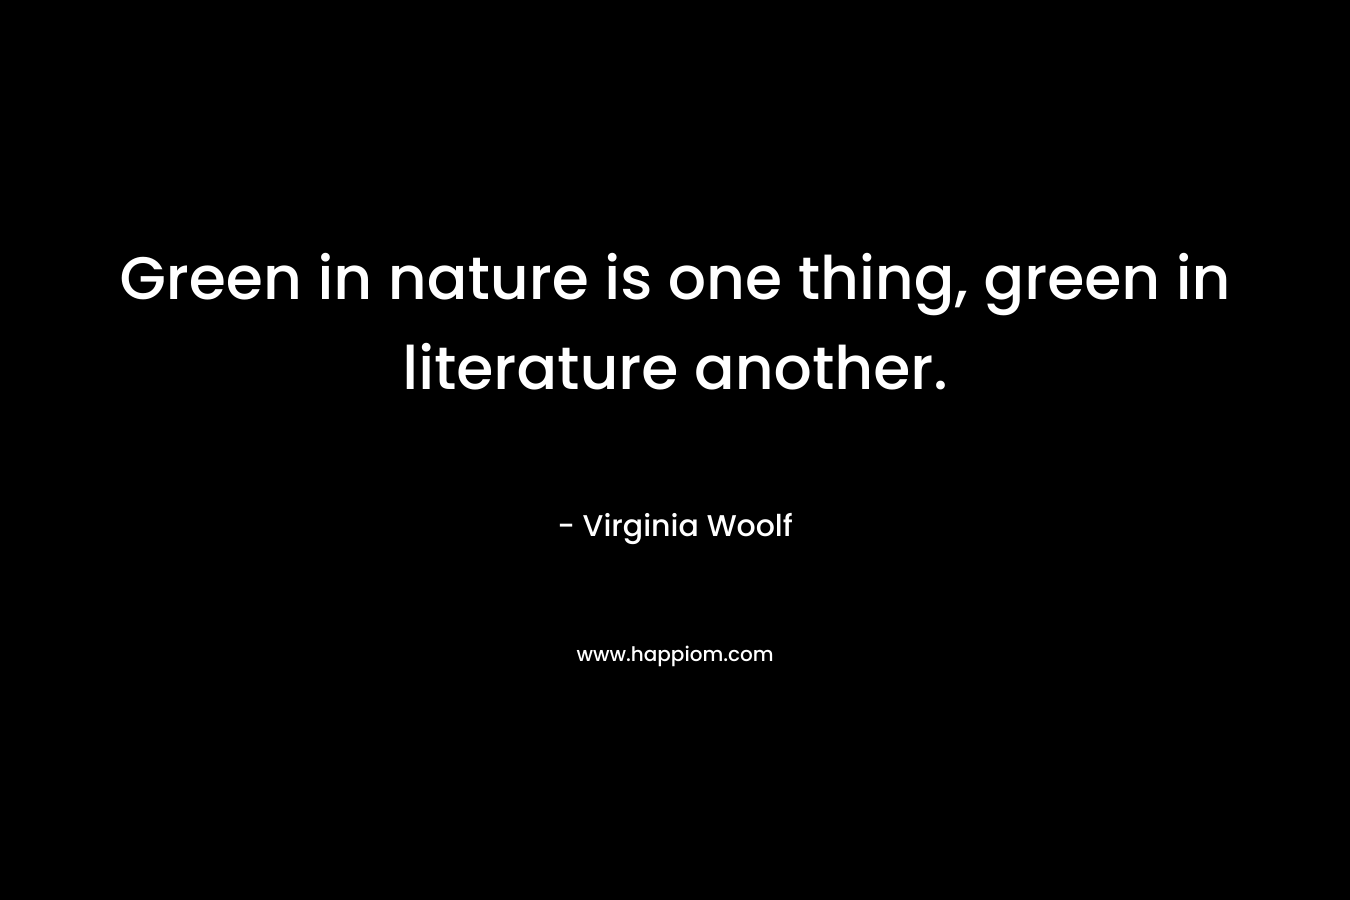 Green in nature is one thing, green in literature another.